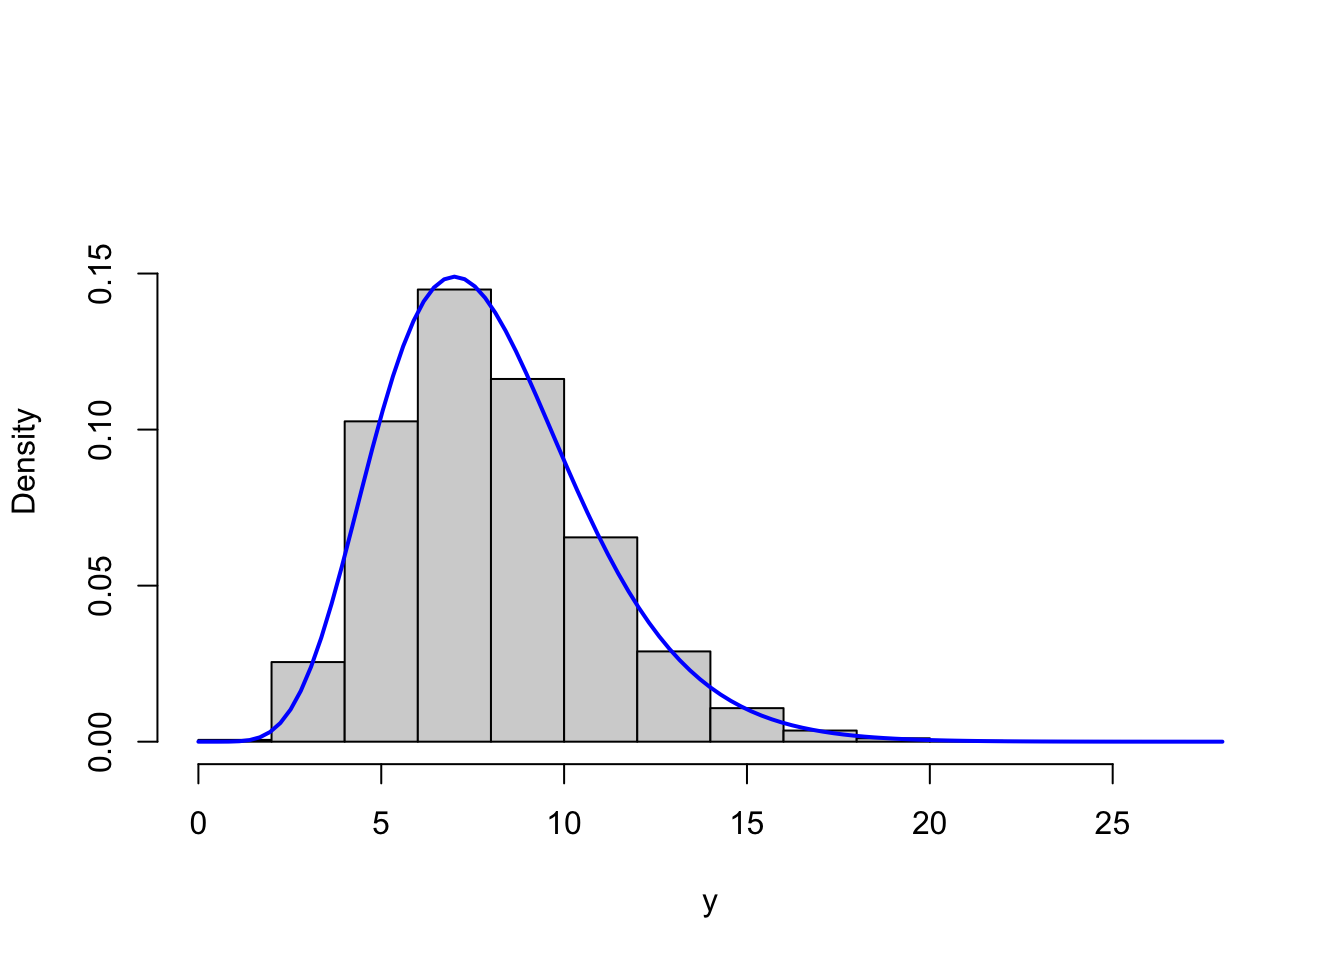 Histograms of simulated gamma distributed variables with shape parameters $r = 8$ (left) and $r = 1$ (right) with corresponding theoretical densities (blue).